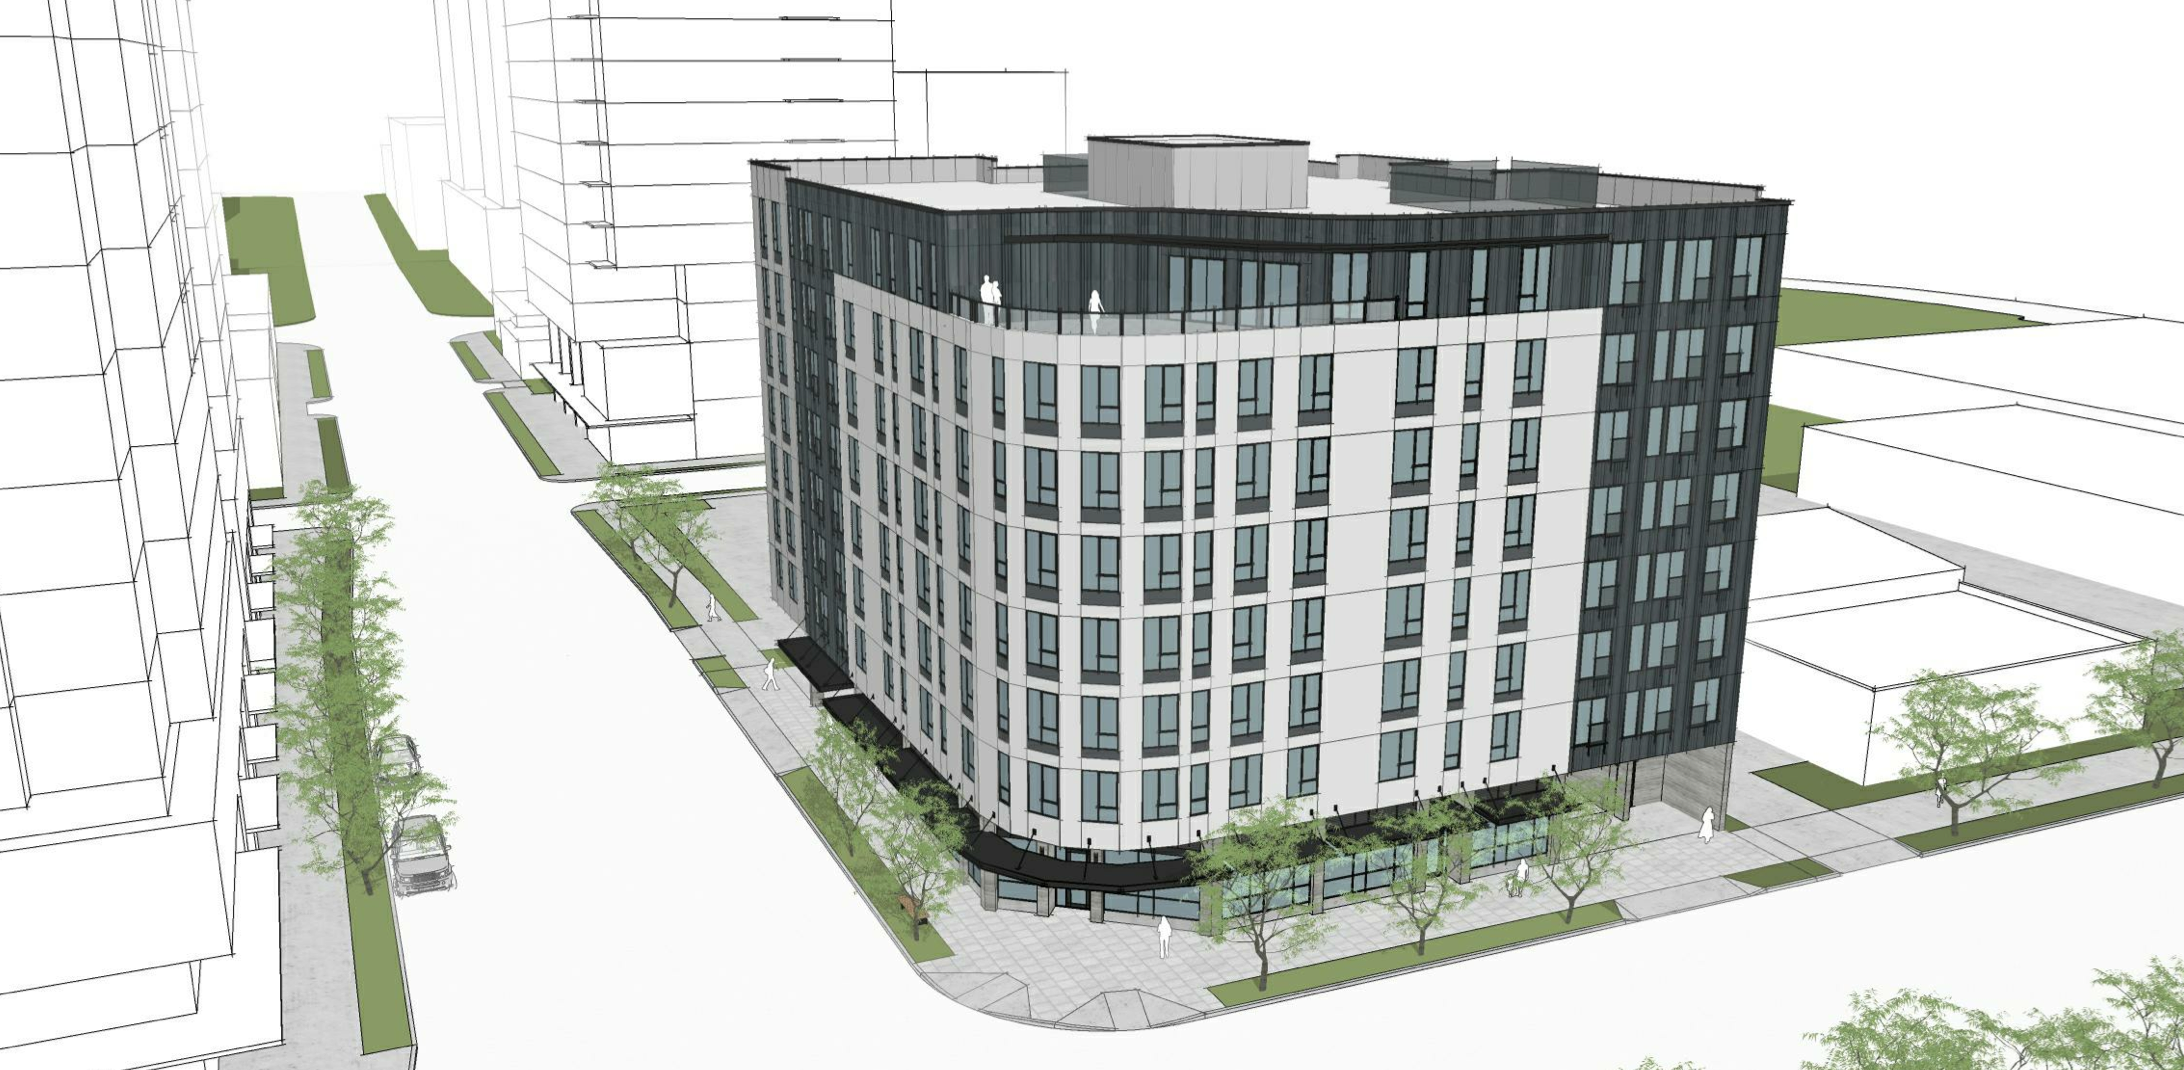 8-Story Apartment Building on NE 10th Street Seeks Design Review Approval